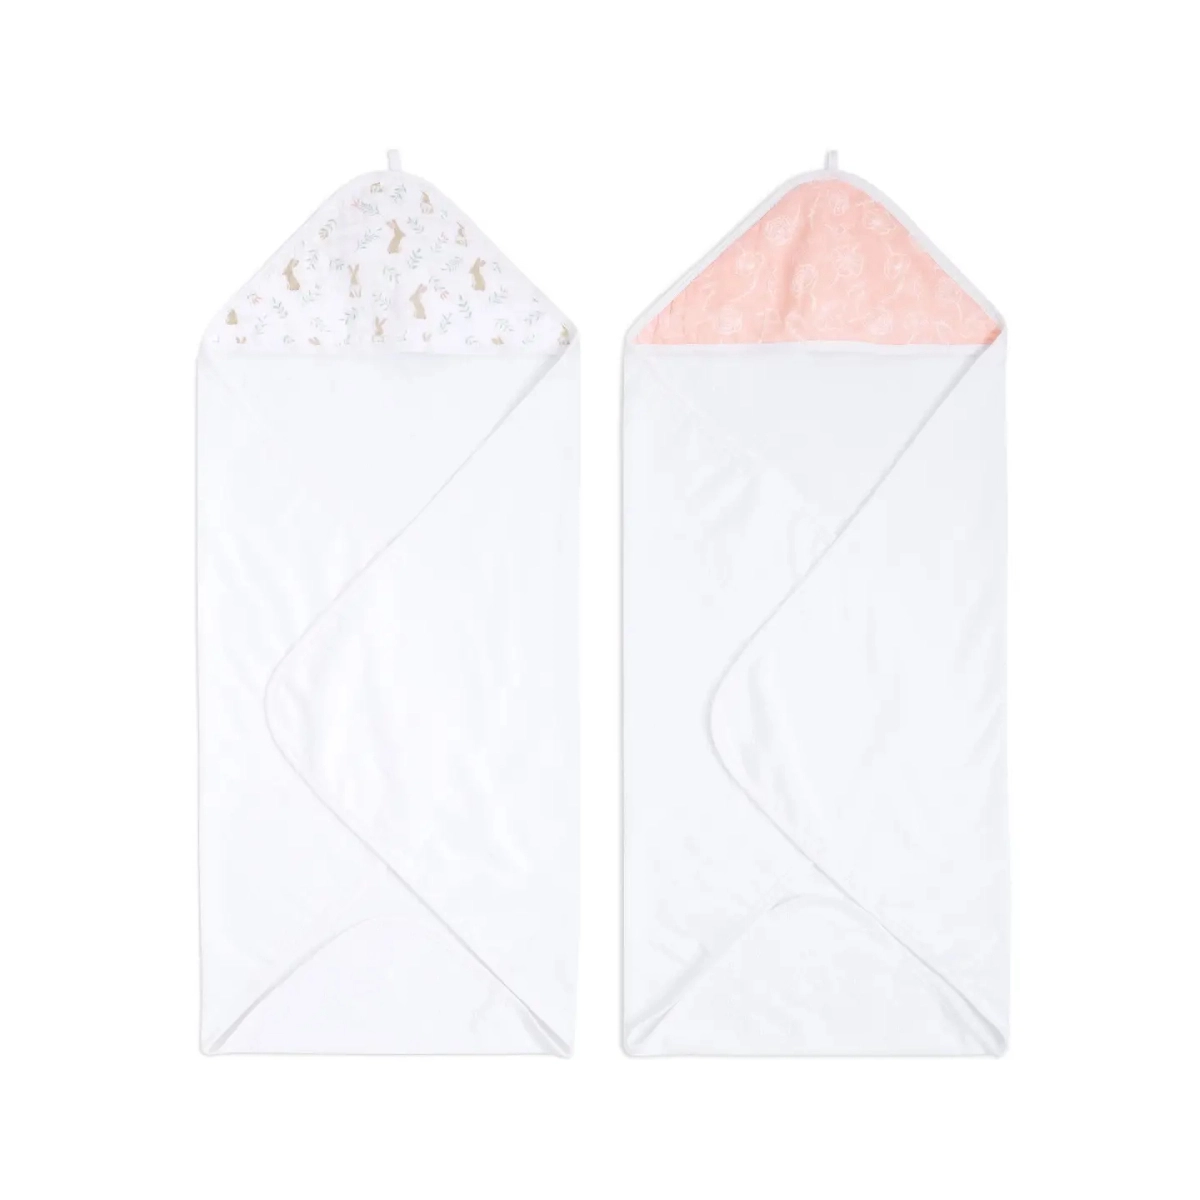 Image of Aden + Anais Pack of 2 Essential Hooded Towel - Blushing Bunnies (23-19-357)